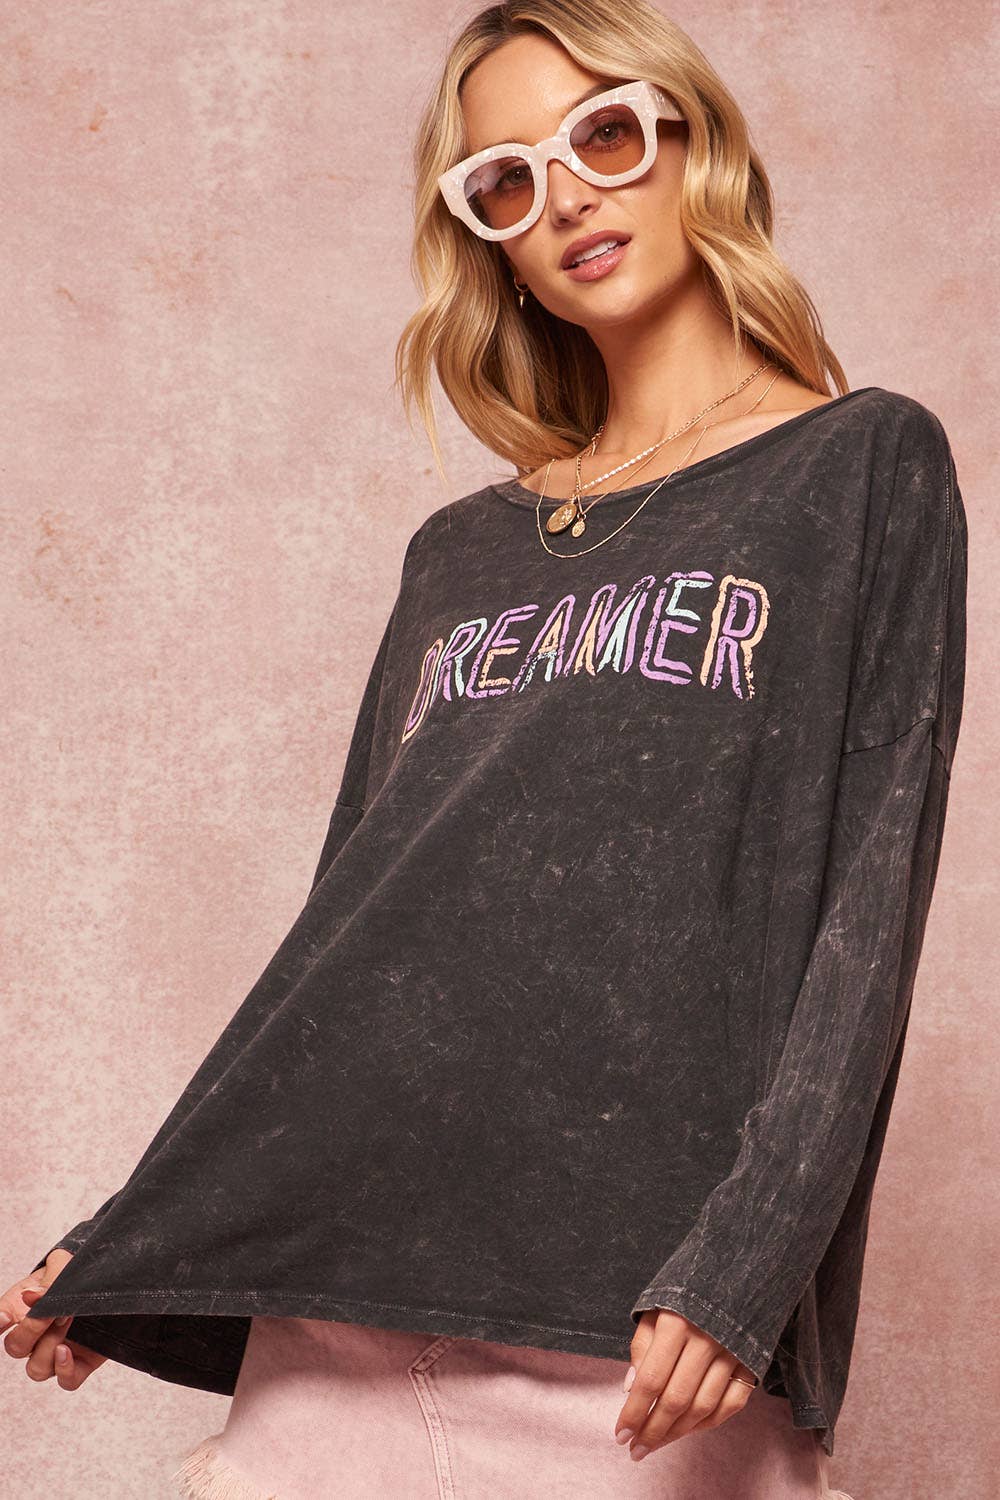 Sale Dreamer Vintage Washed Long-Sleeve Graphic Tee